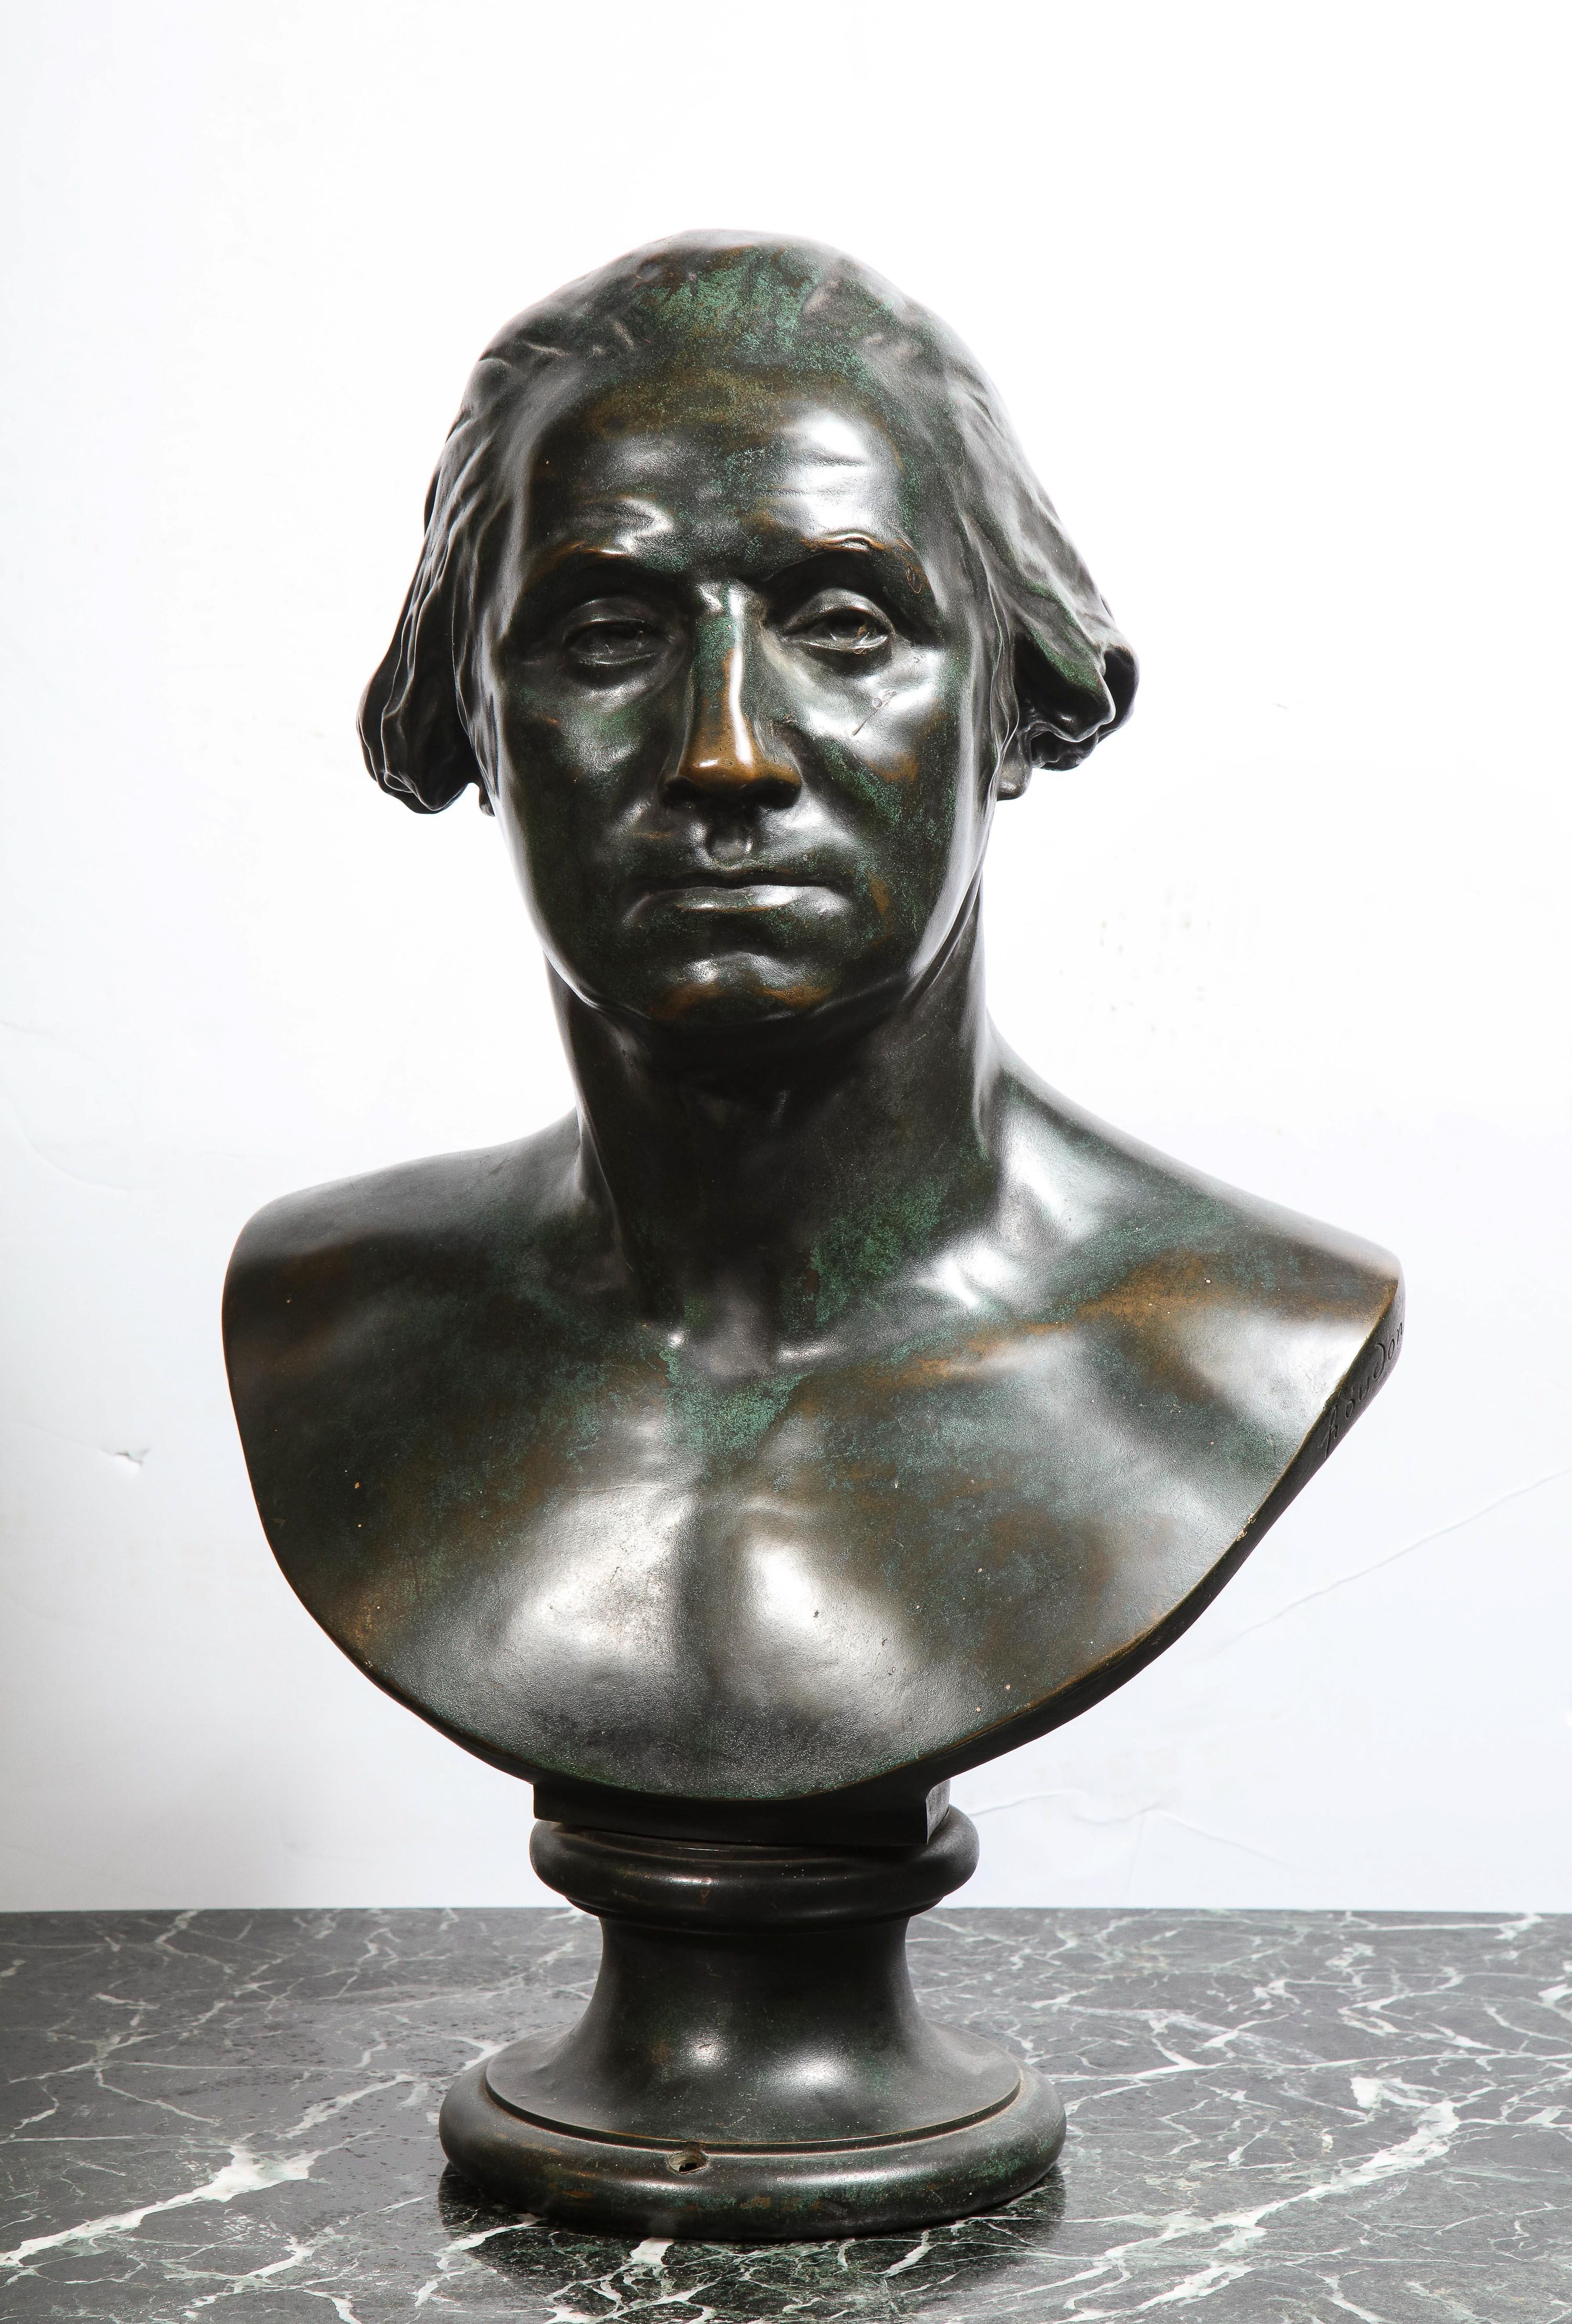 Large and Rare Patinated Bronze Bust of George Washington, by F. Barbedienne - Gold Figurative Sculpture by F. Barbedienne Foundry